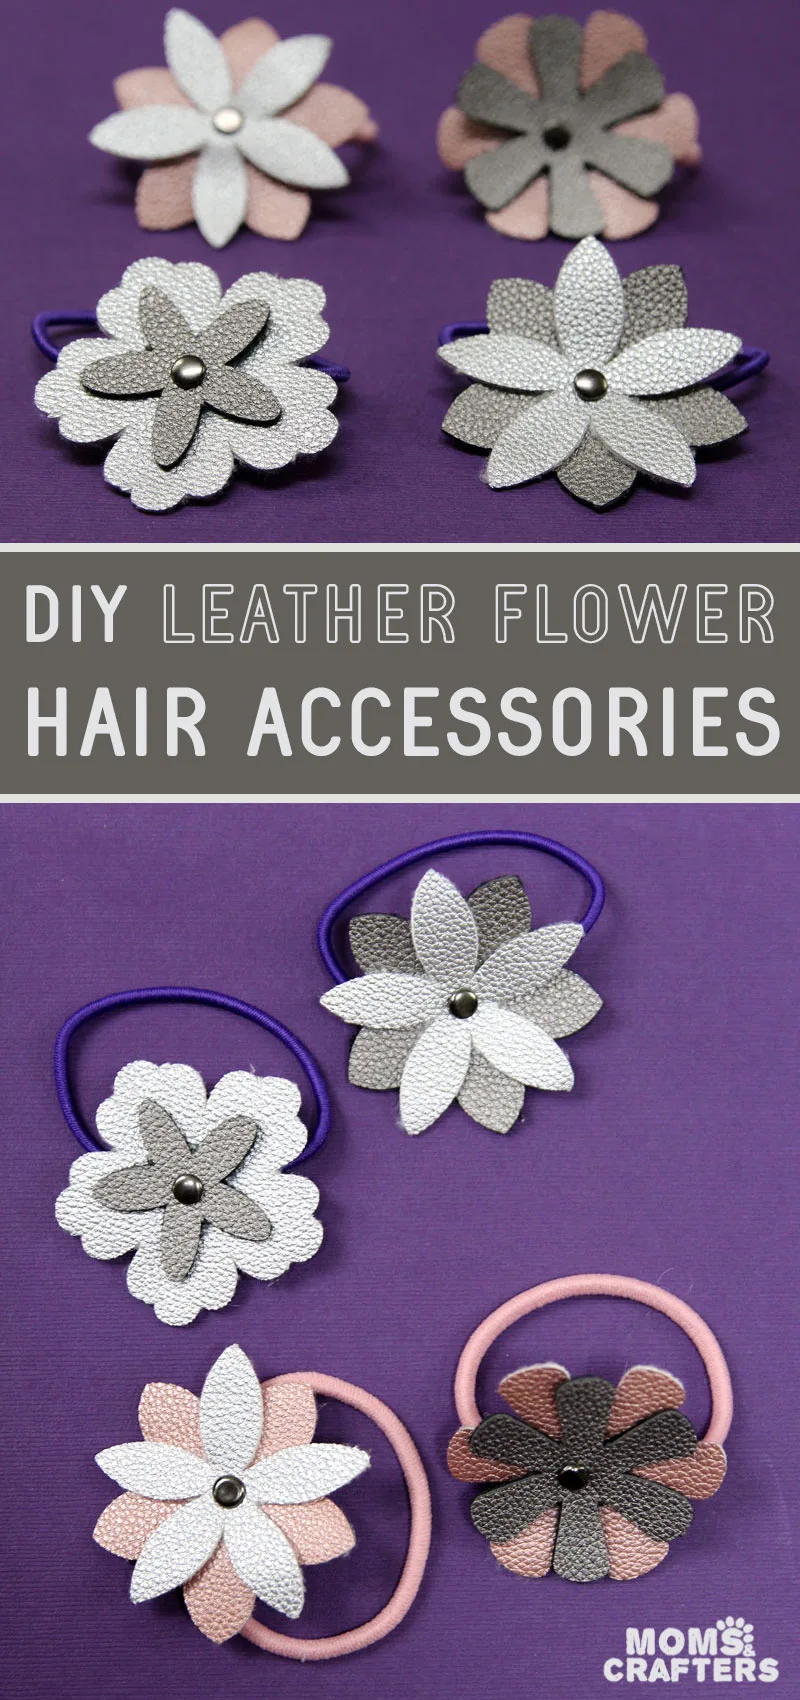 DIY flower hair accessories from leather